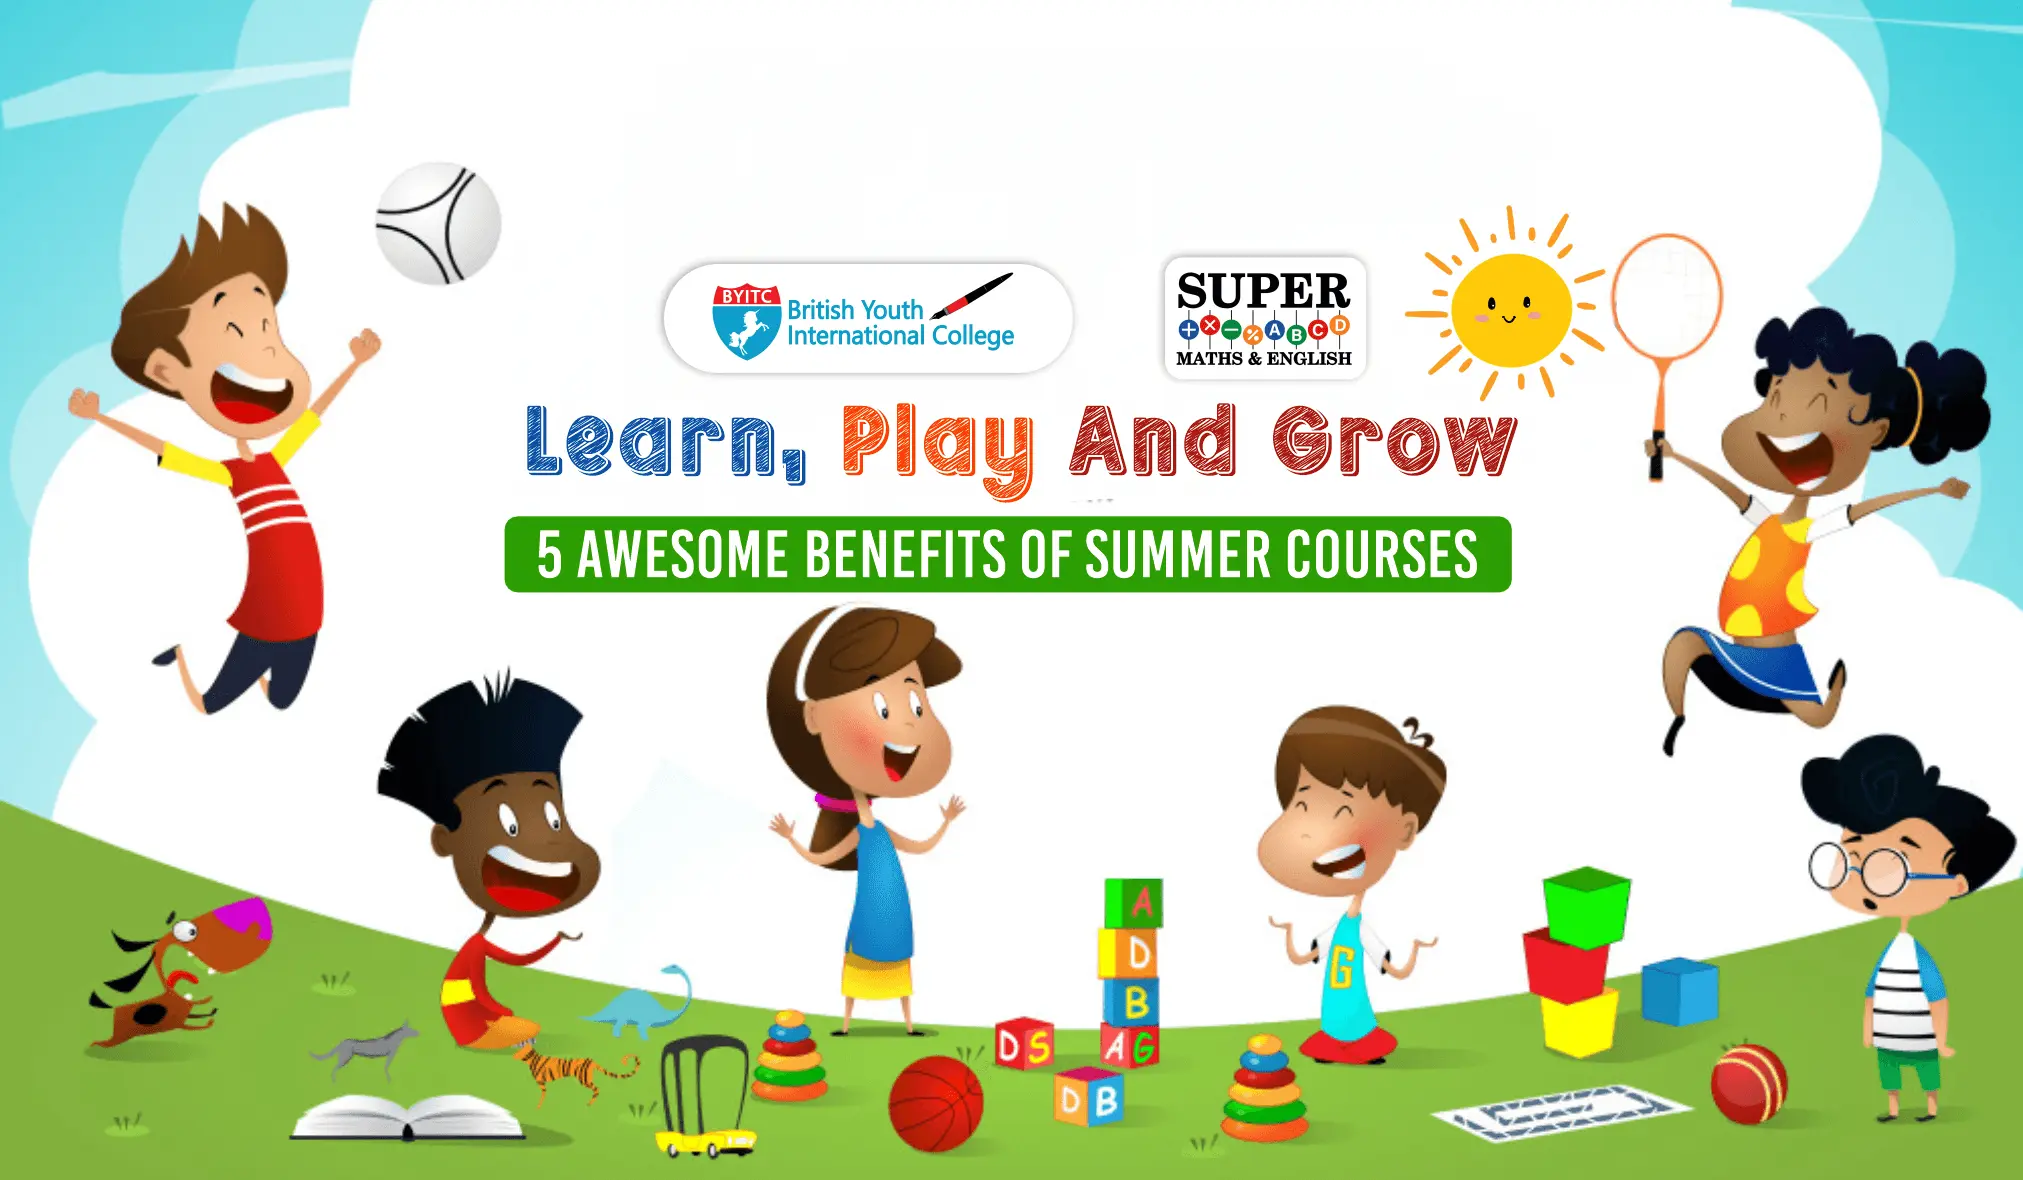 Learn, play and grow: 5 Awesome Benefits of summer courses